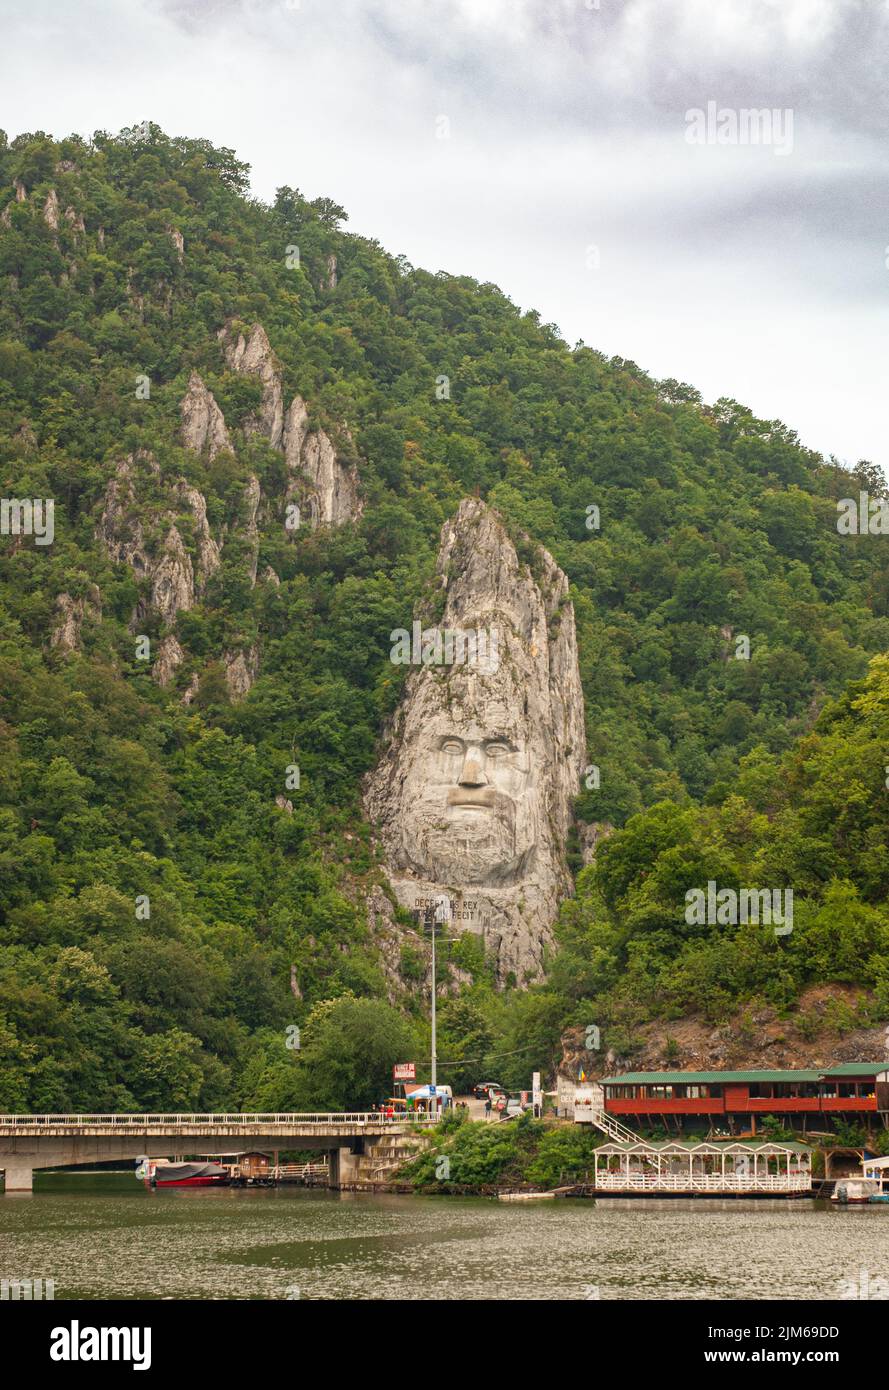 At the Iron Gate of the Danube River you see this carving of the ancient  Dacian King Decebalus of Romania. Stock Photo